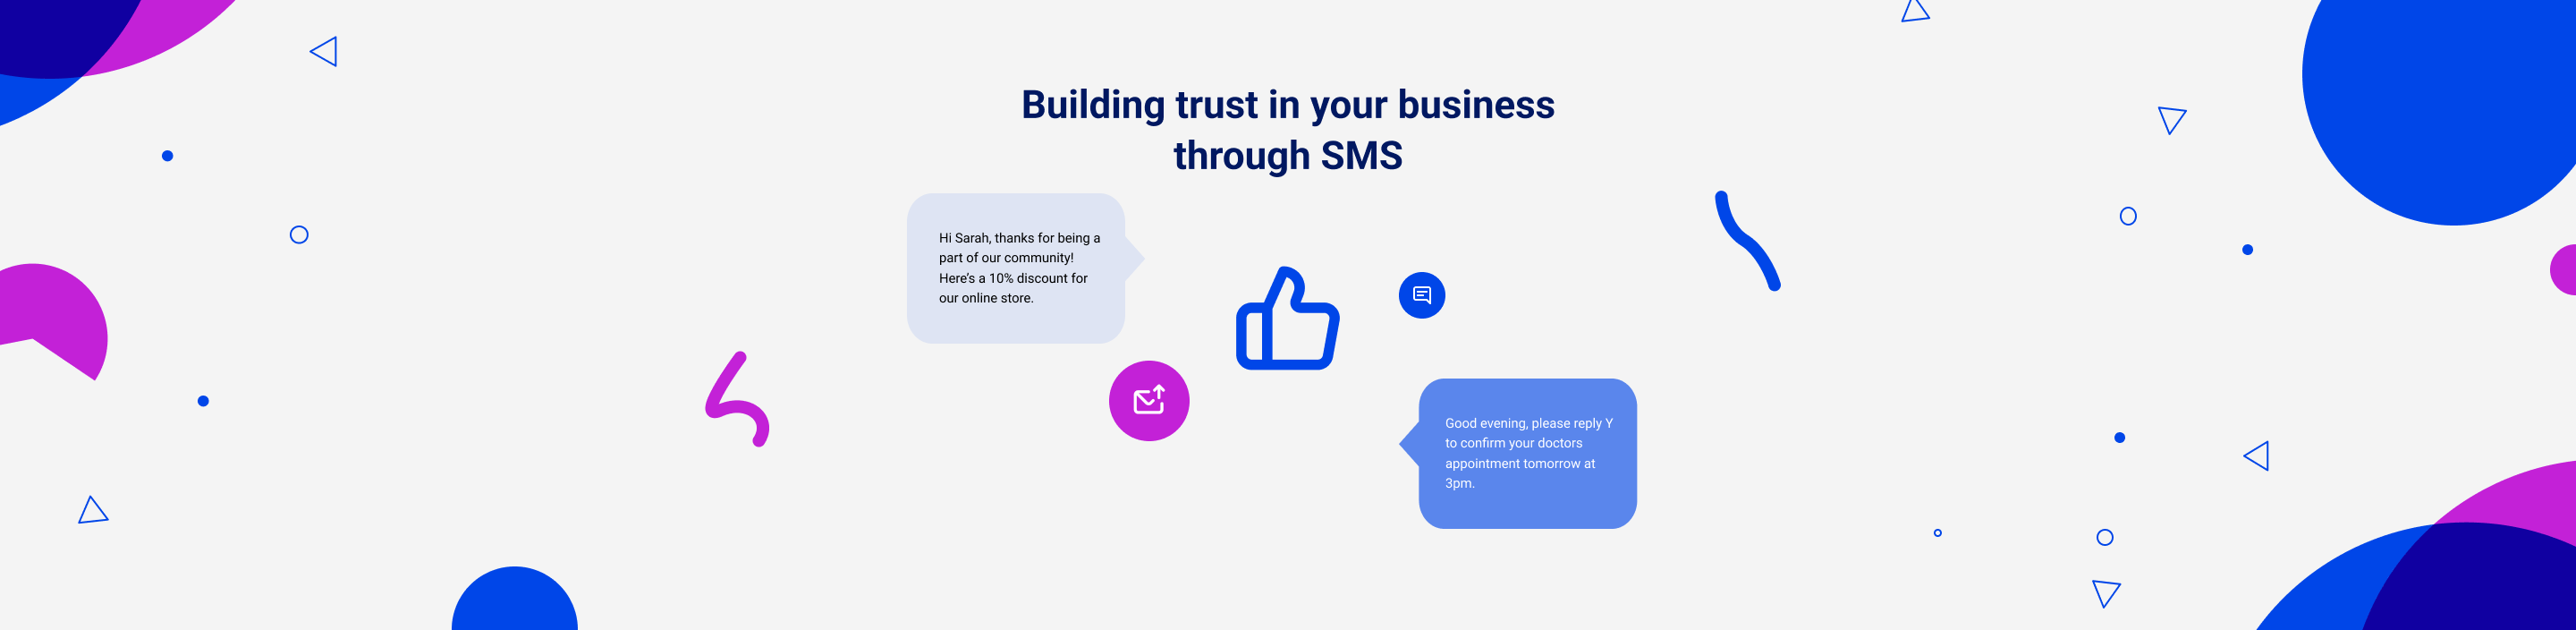 building-trust-in-your-business-via-text-messaging